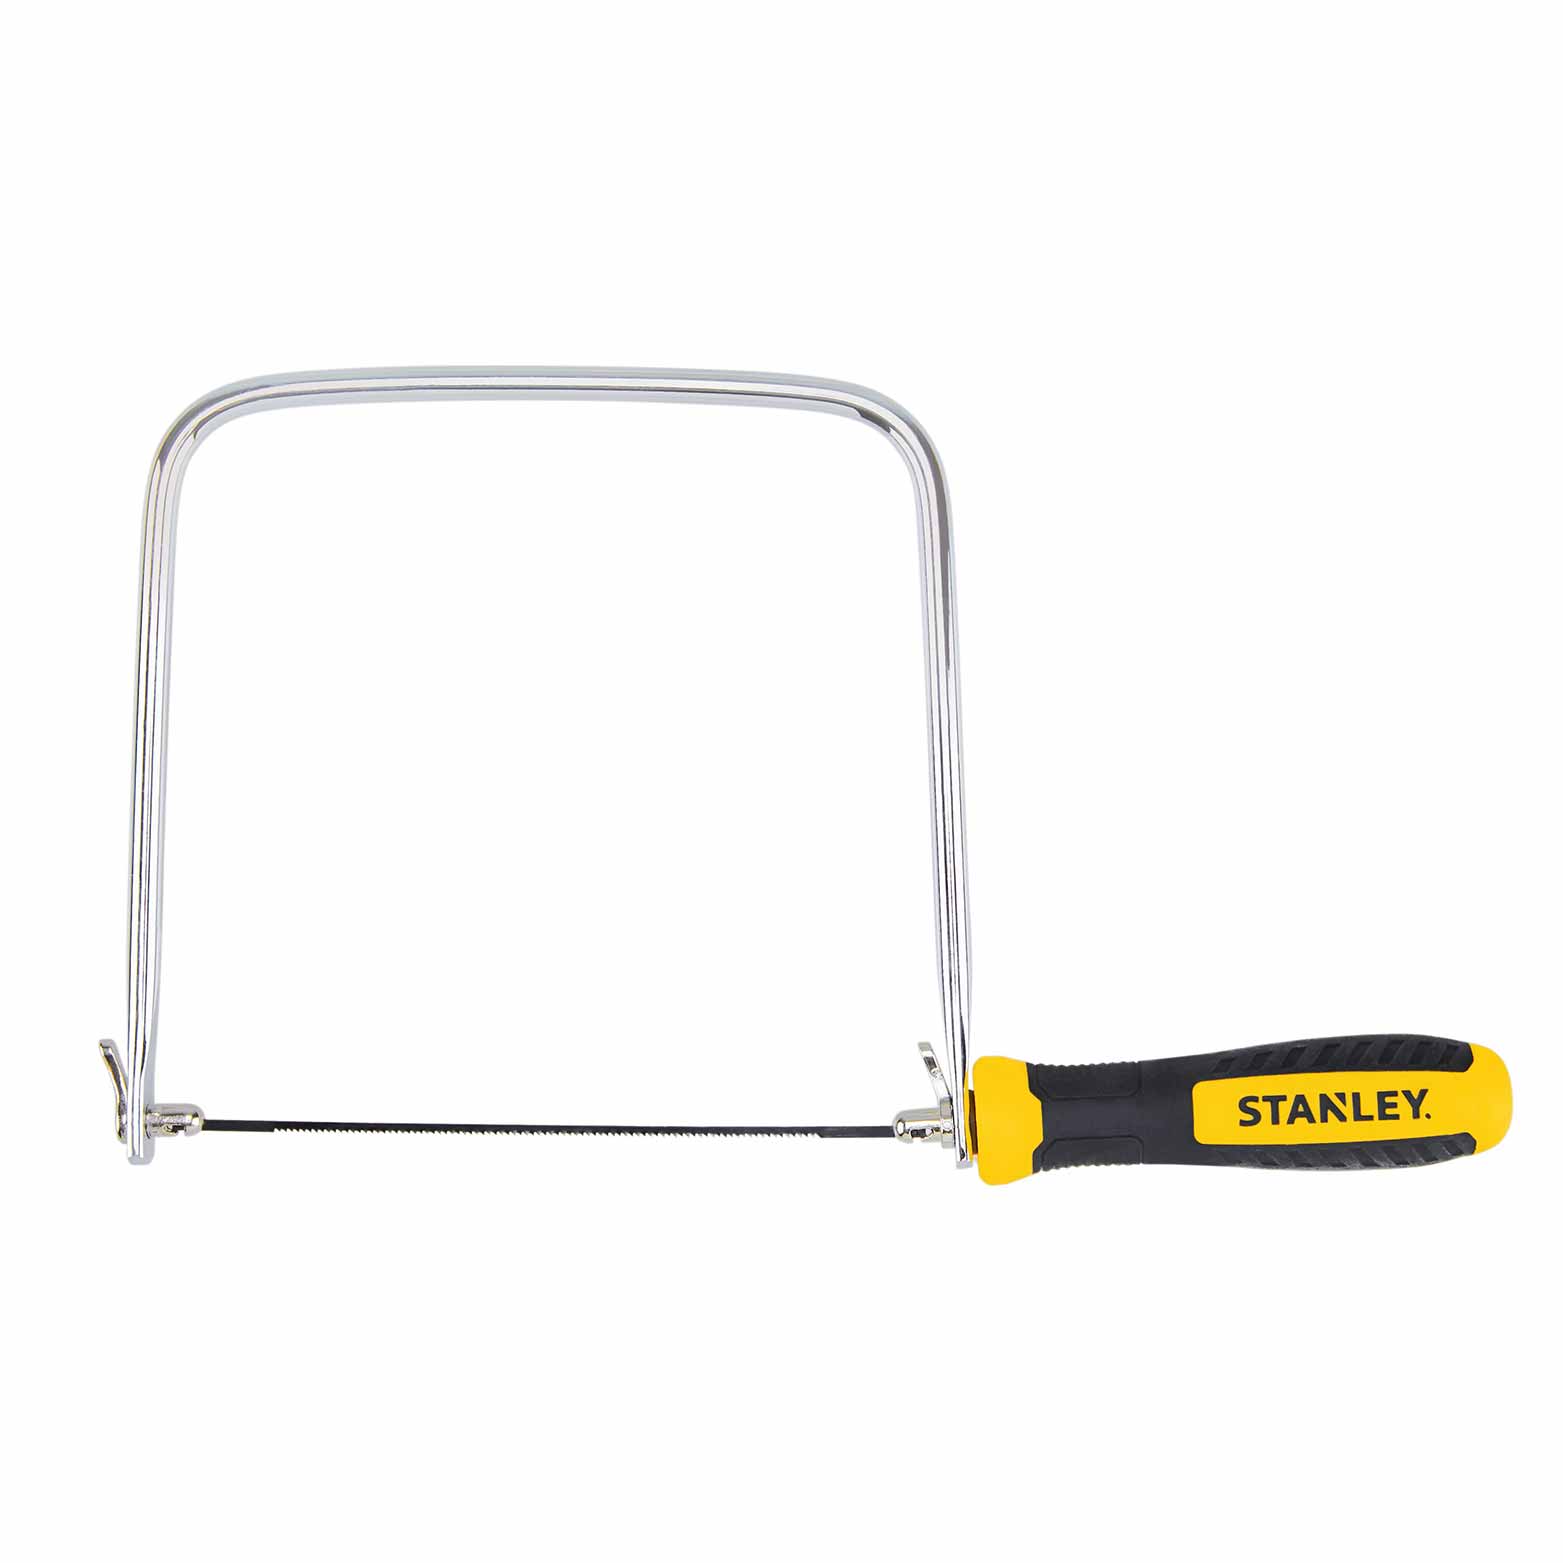 What is a Coping Saw